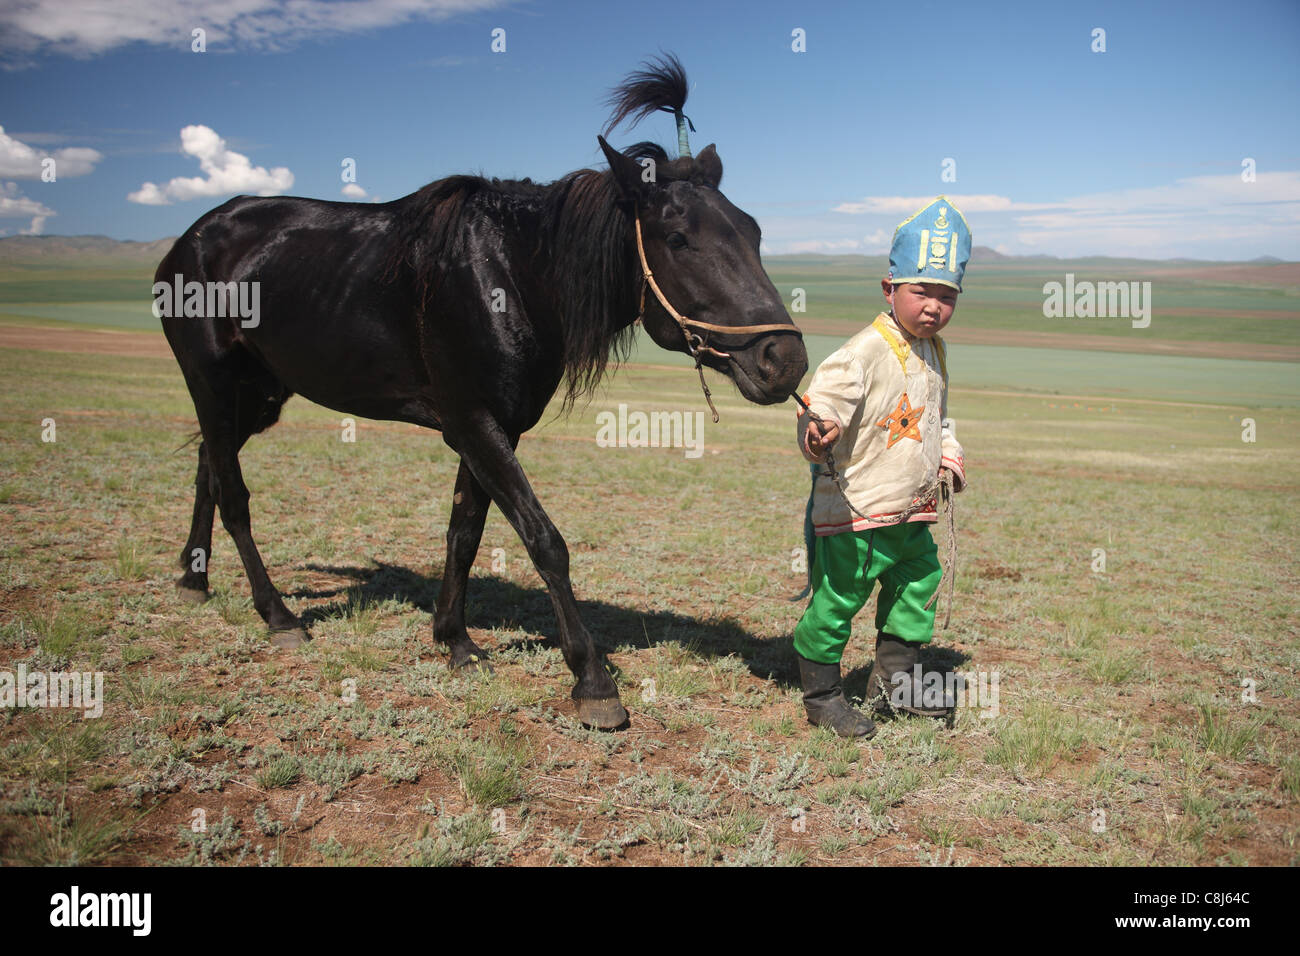 Naadam-Festival, Mongolia, nomads, Mongols, summer-festival, wrestling, archery, horse racing, Chinggis Khaan, cultural event, g Stock Photo